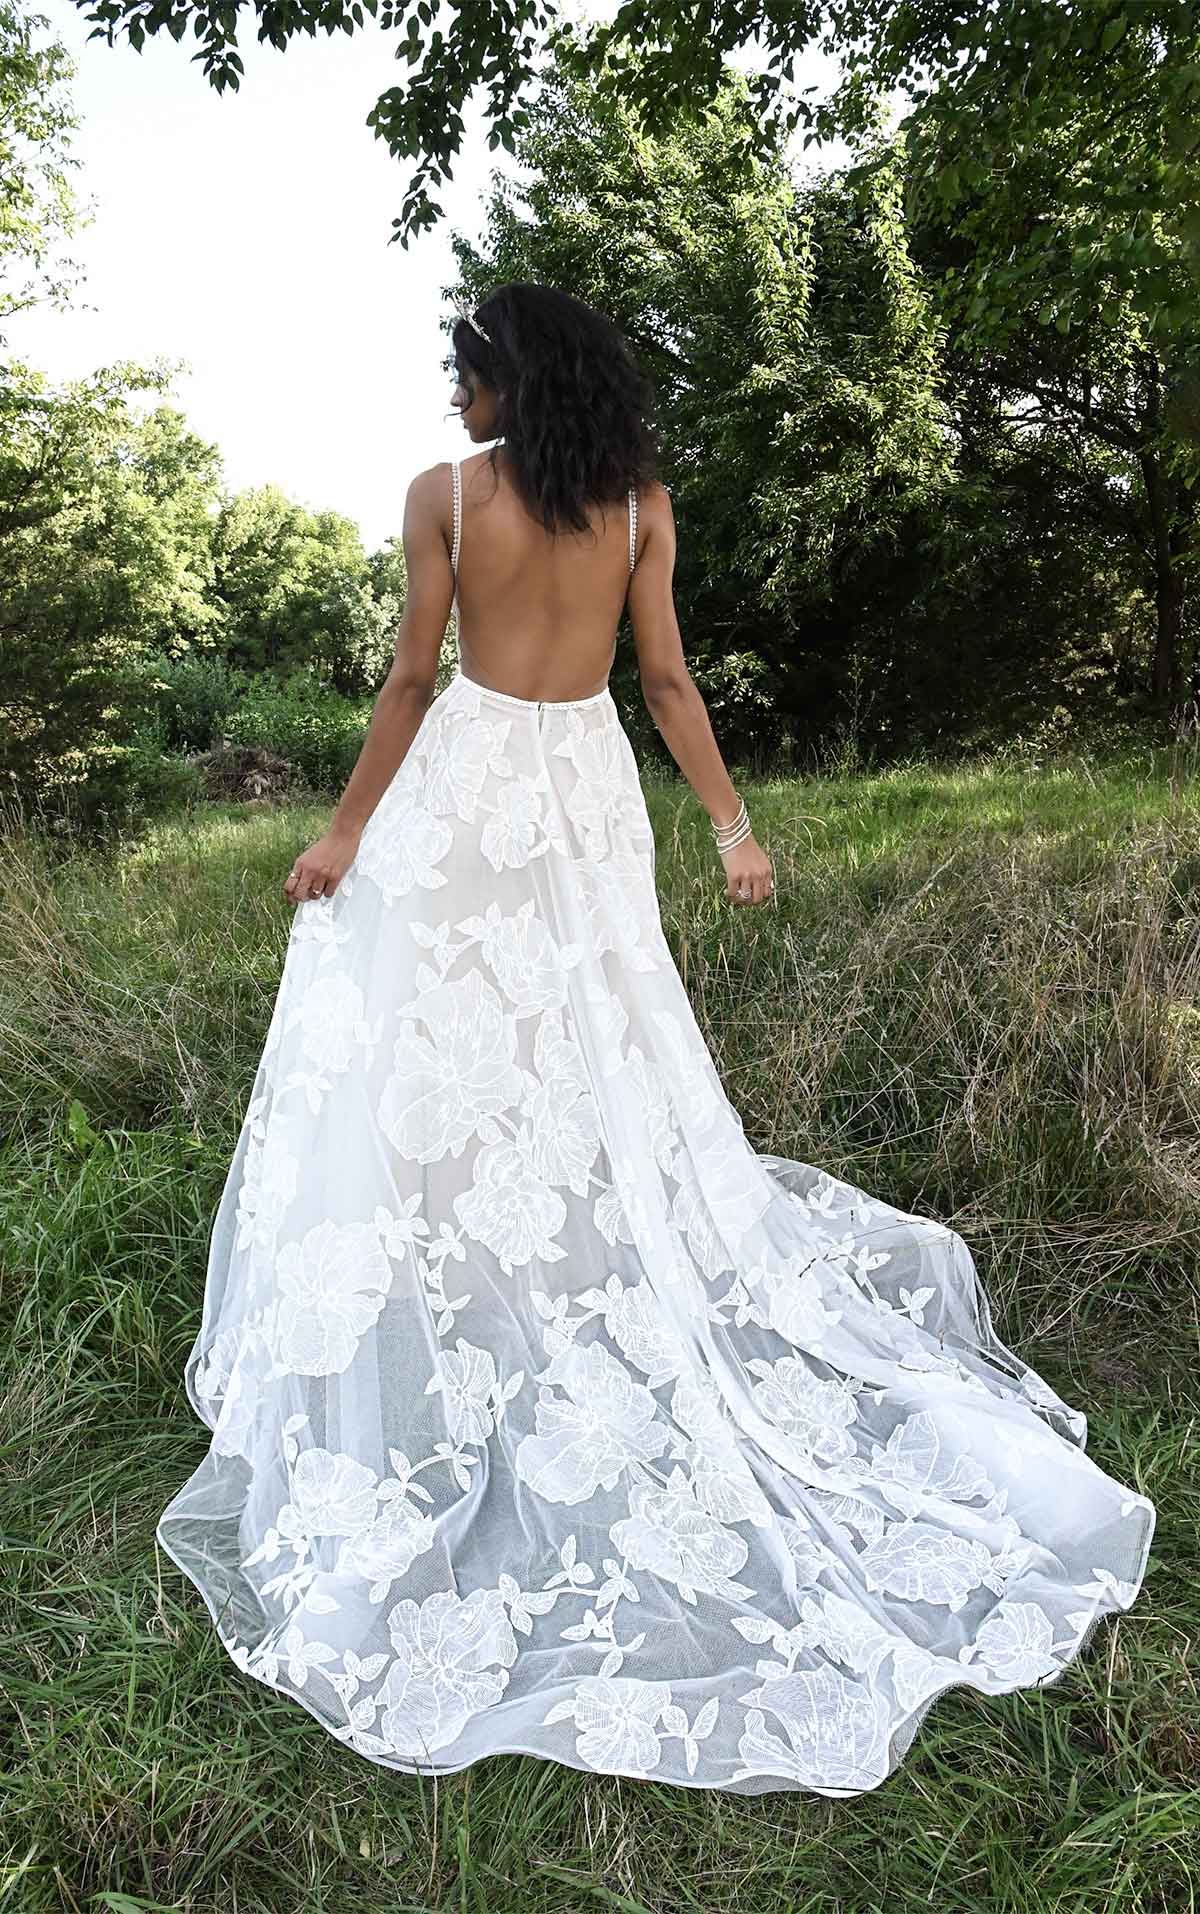 aspen Dreamy Boho Wedding Dress with Open Back and Botanical Lace Details  by All Who Wander